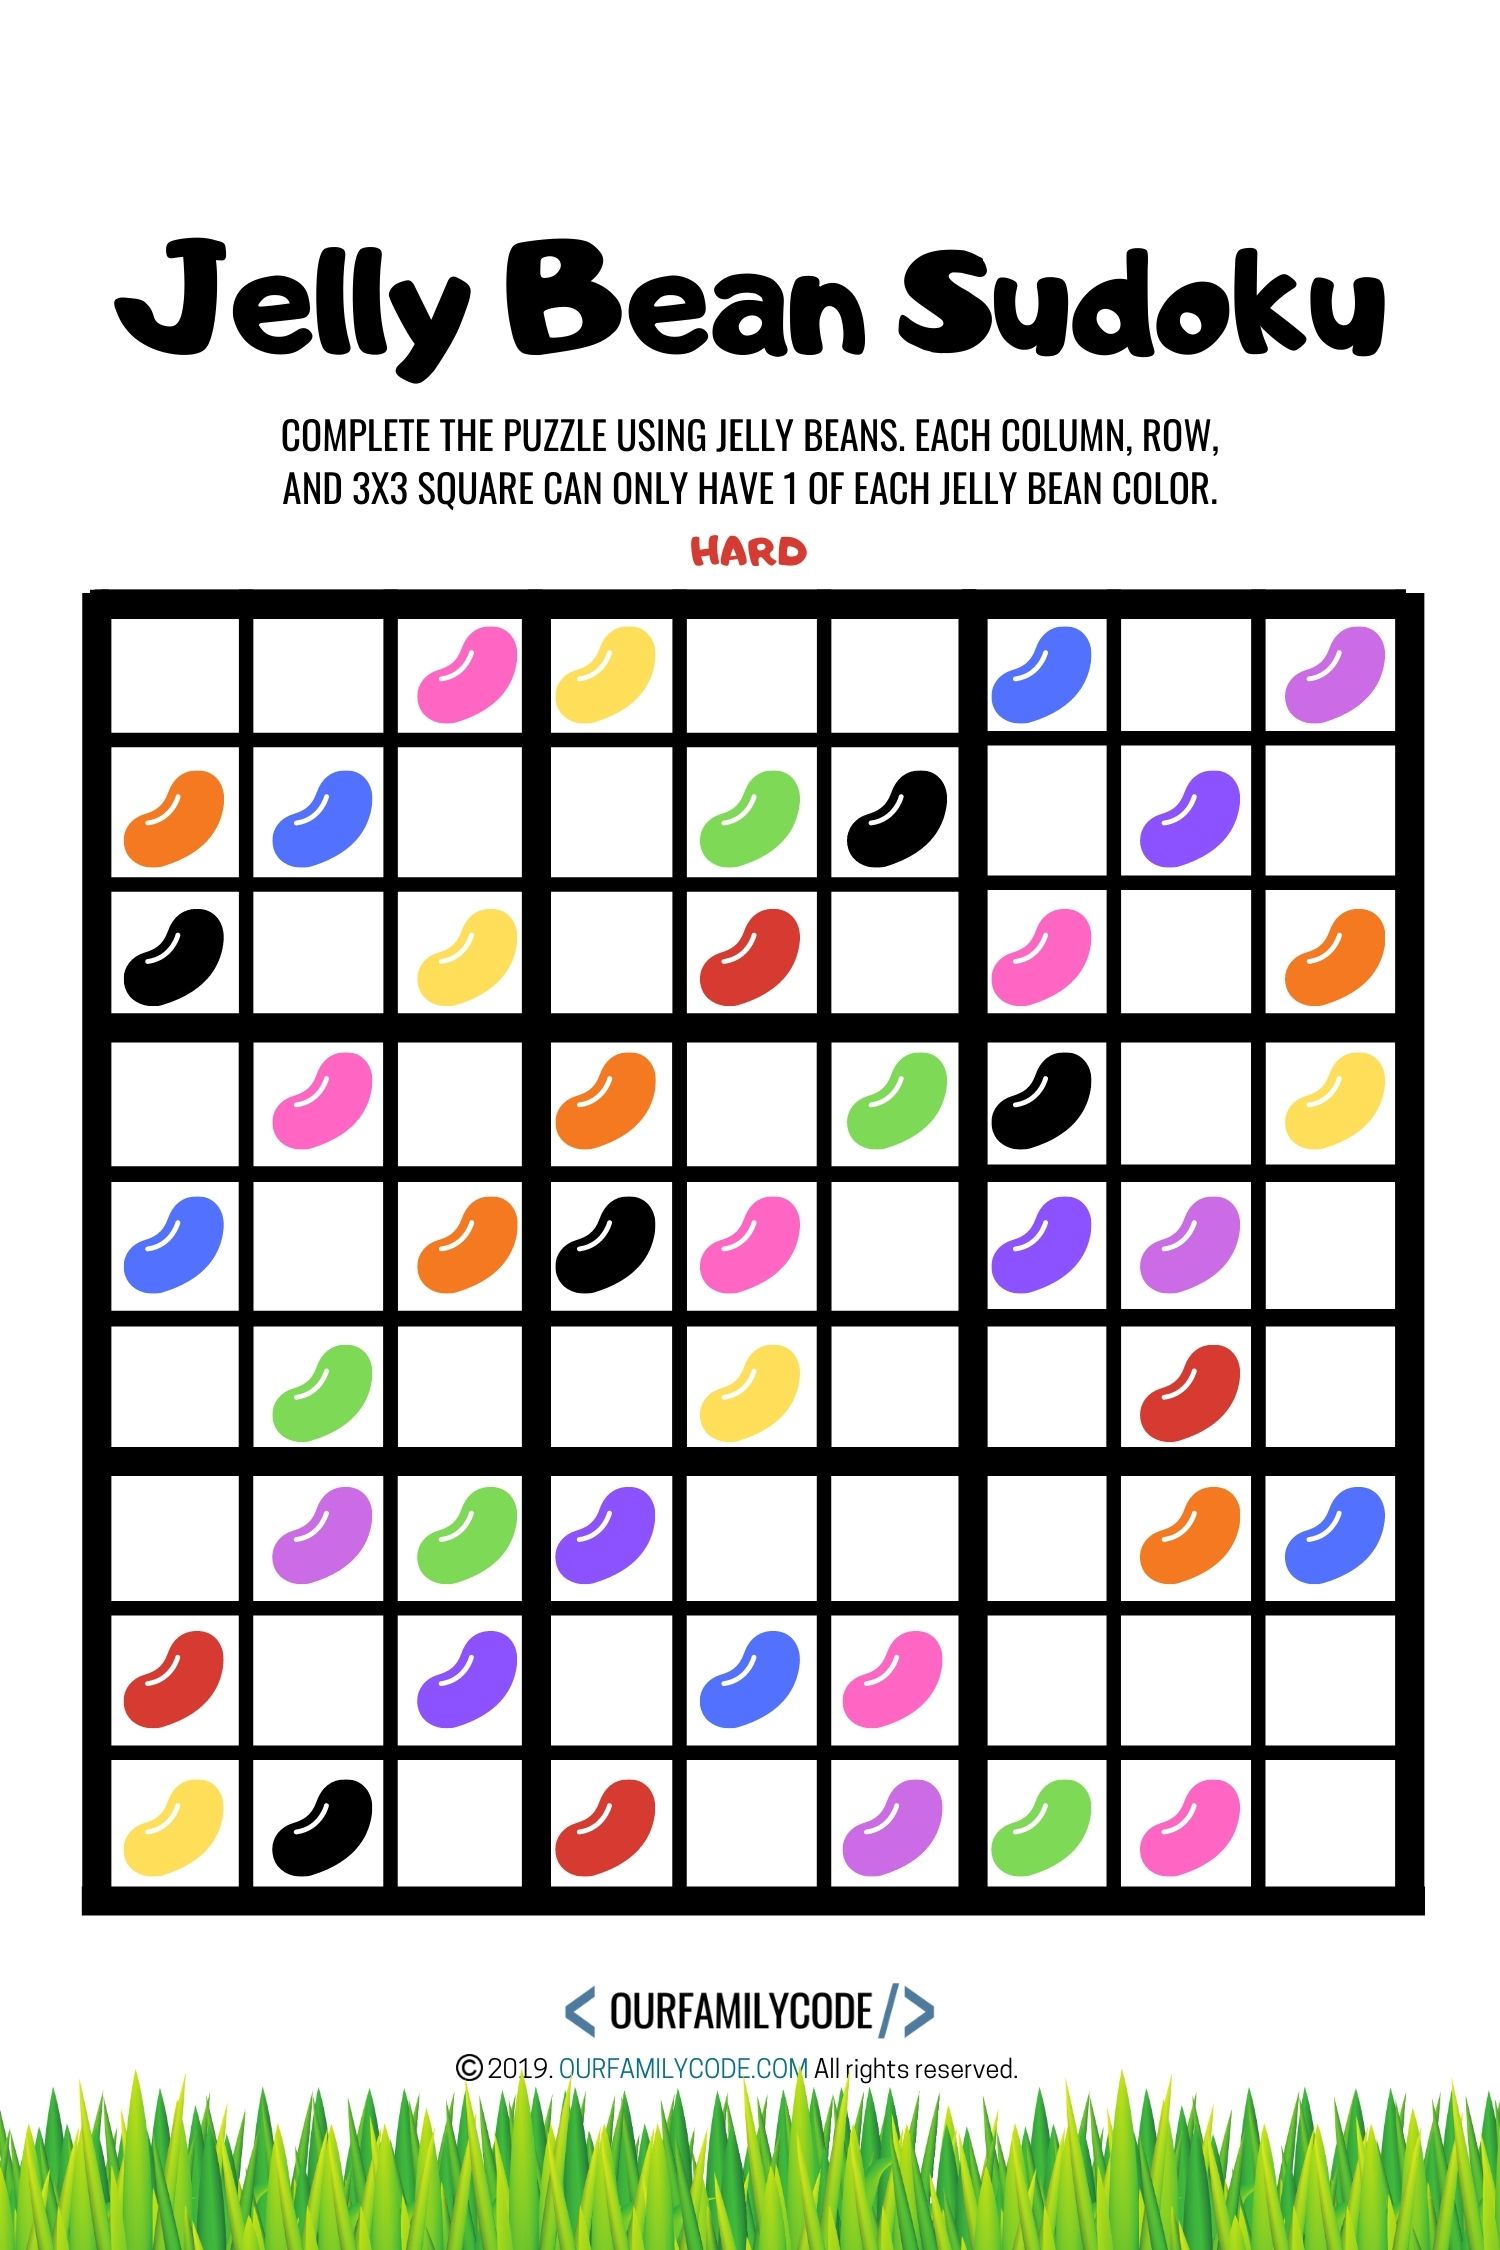 Work on logical reasoning and colors with this Easter Jelly Bean Sudoku unplugged coding activity for preschoolers to 5th graders! #STEAM #STEM #teachkidstocode #computationalthinking #algorithms #logicalreasoning #homeschool #sudokuforkids